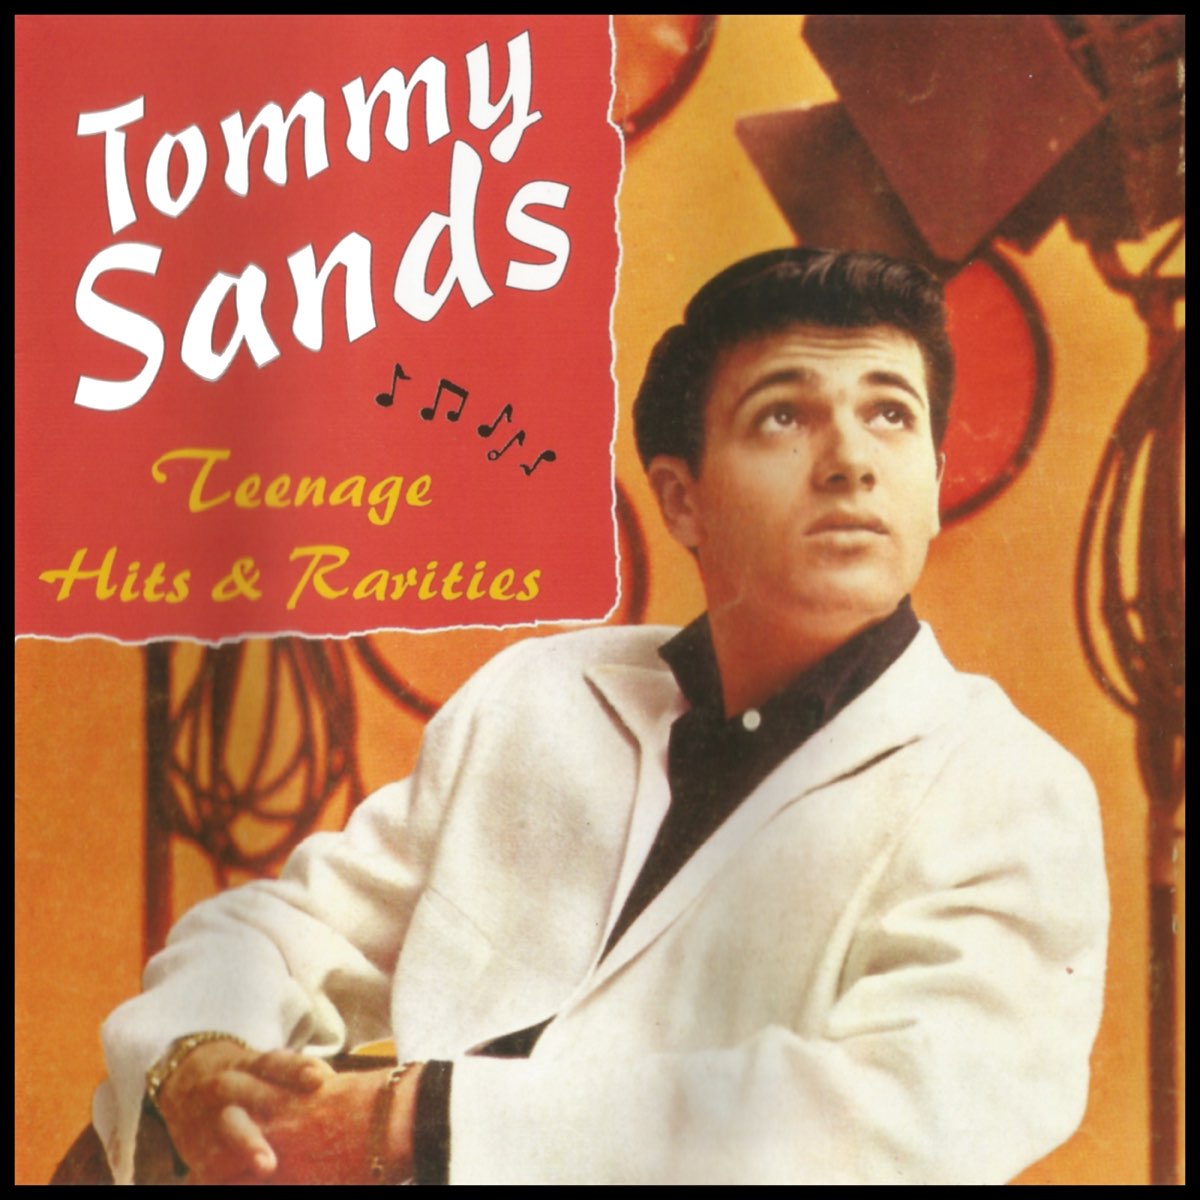 Tommy Sands